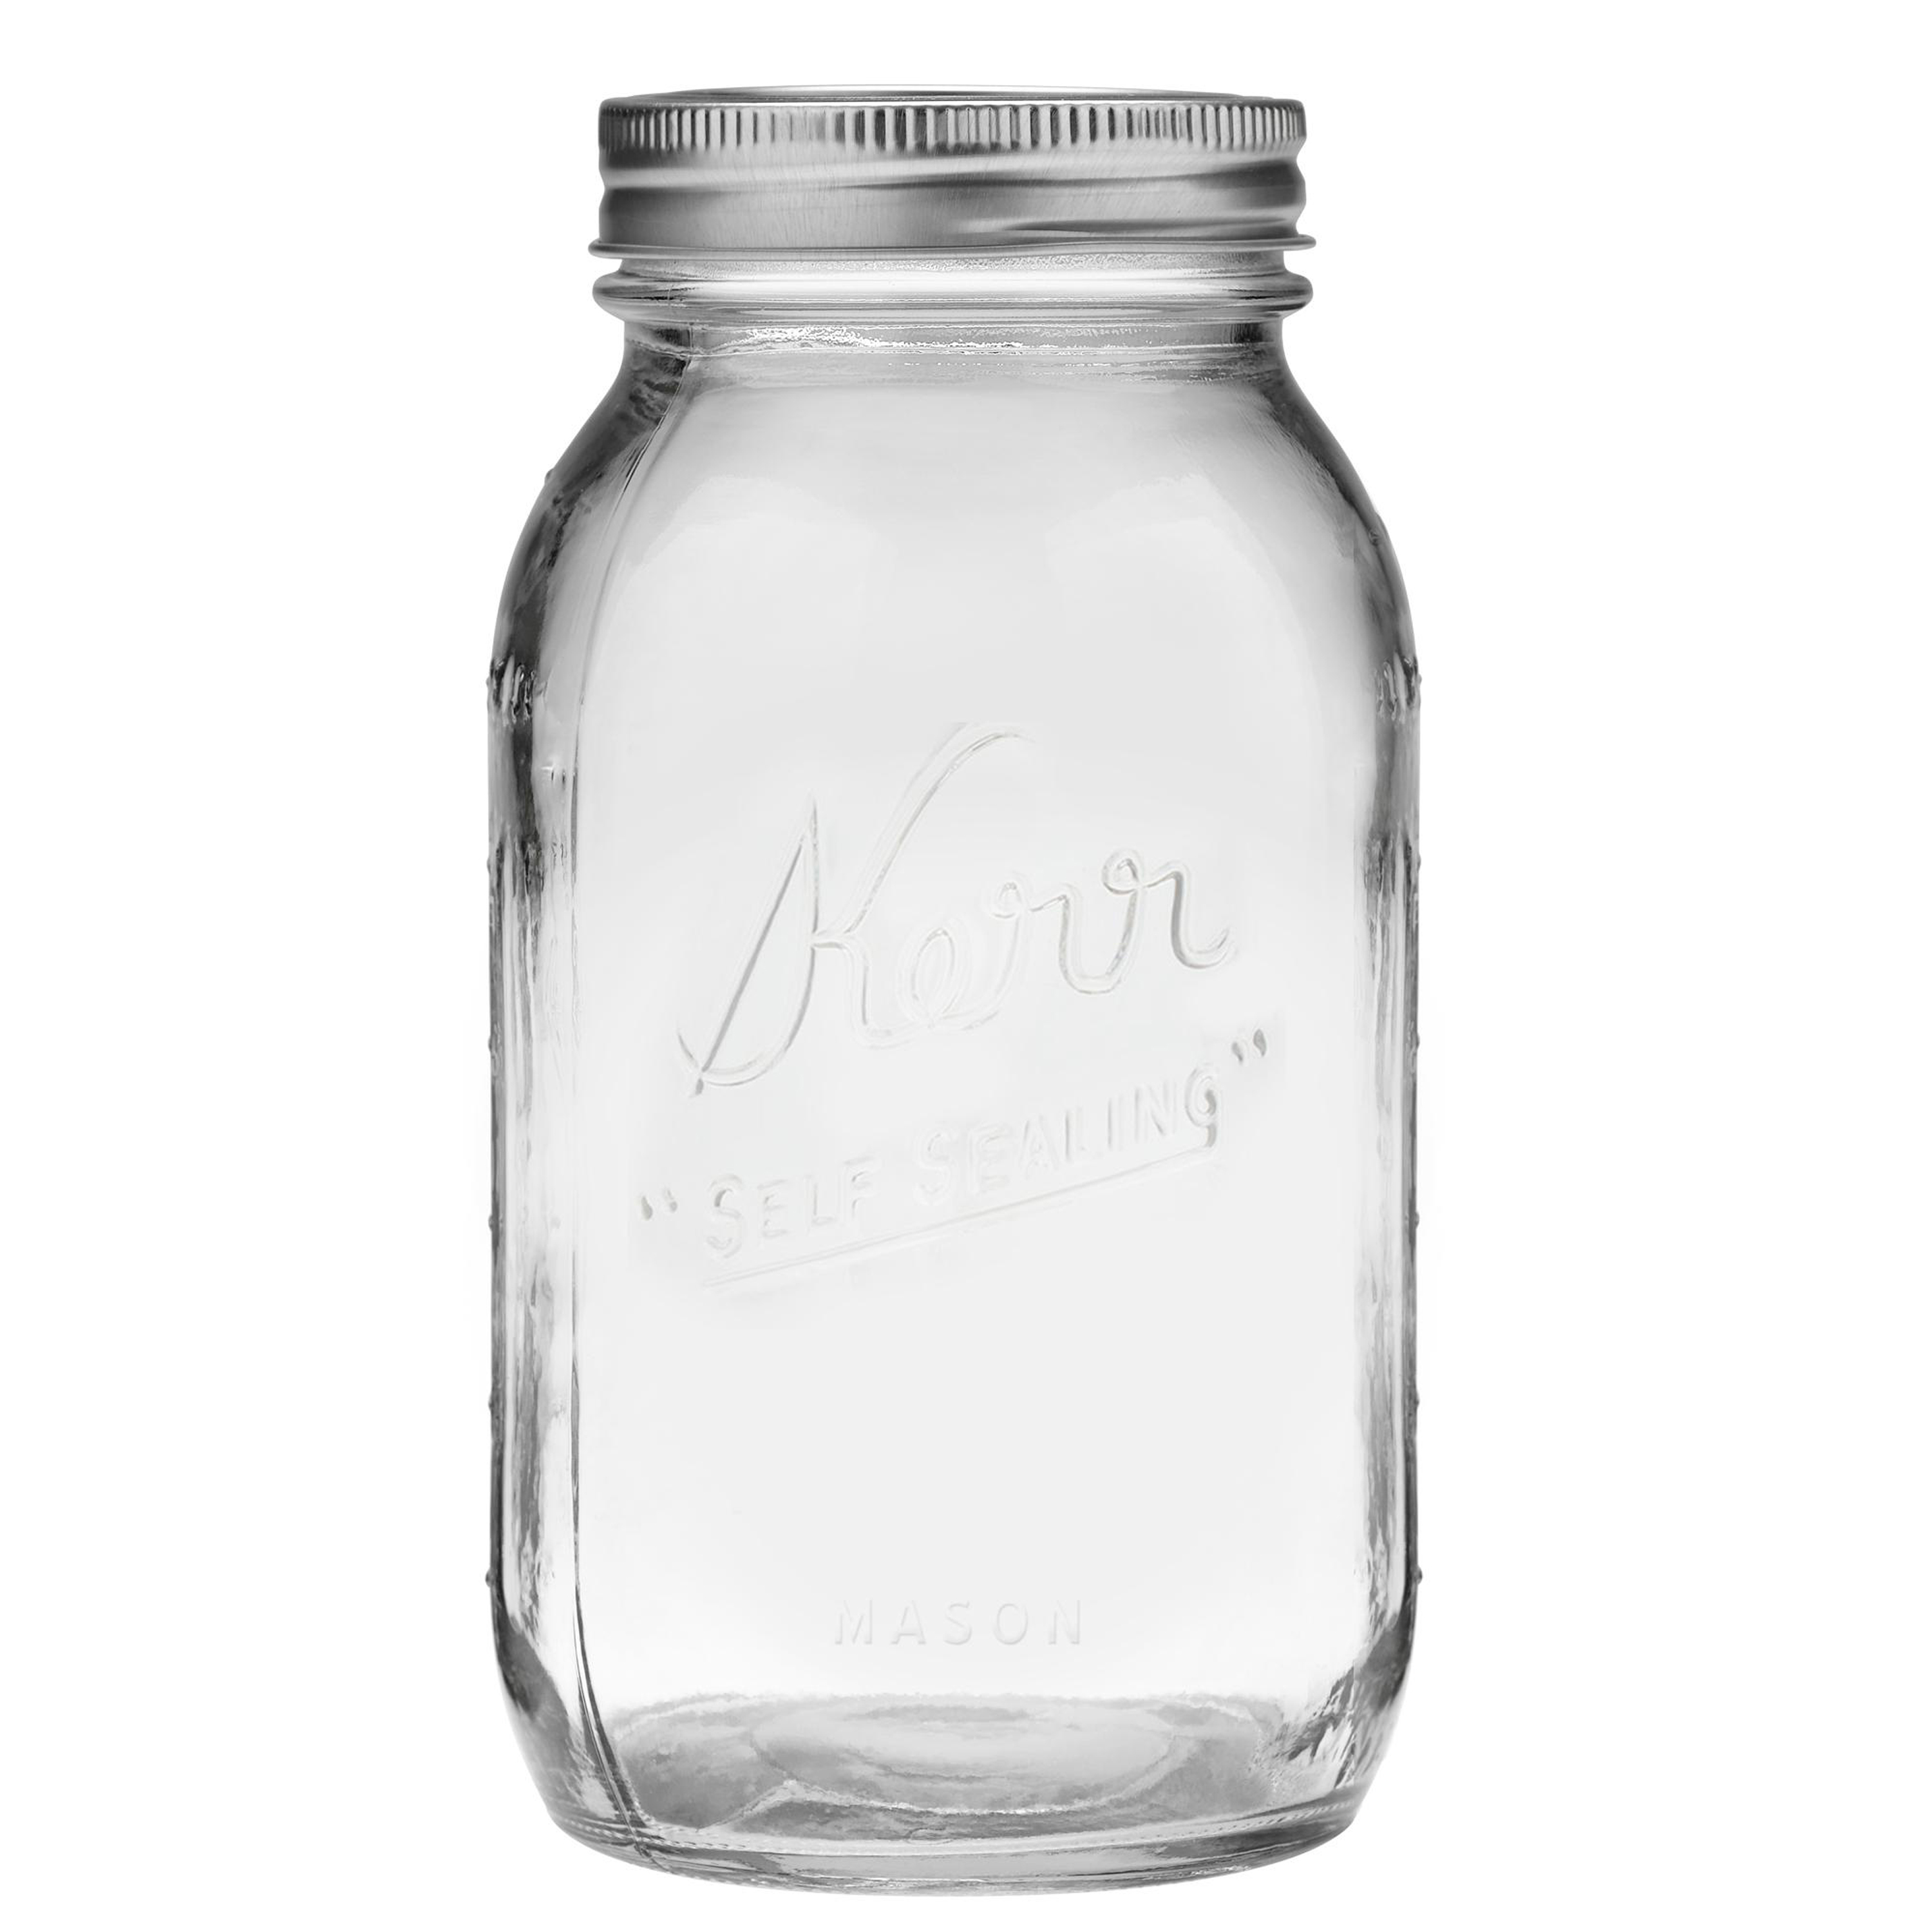 Kerr Glass Mason Jar With Lid & Band, Regular Mouth, 32 Ounces, 12 Count - image 2 of 4